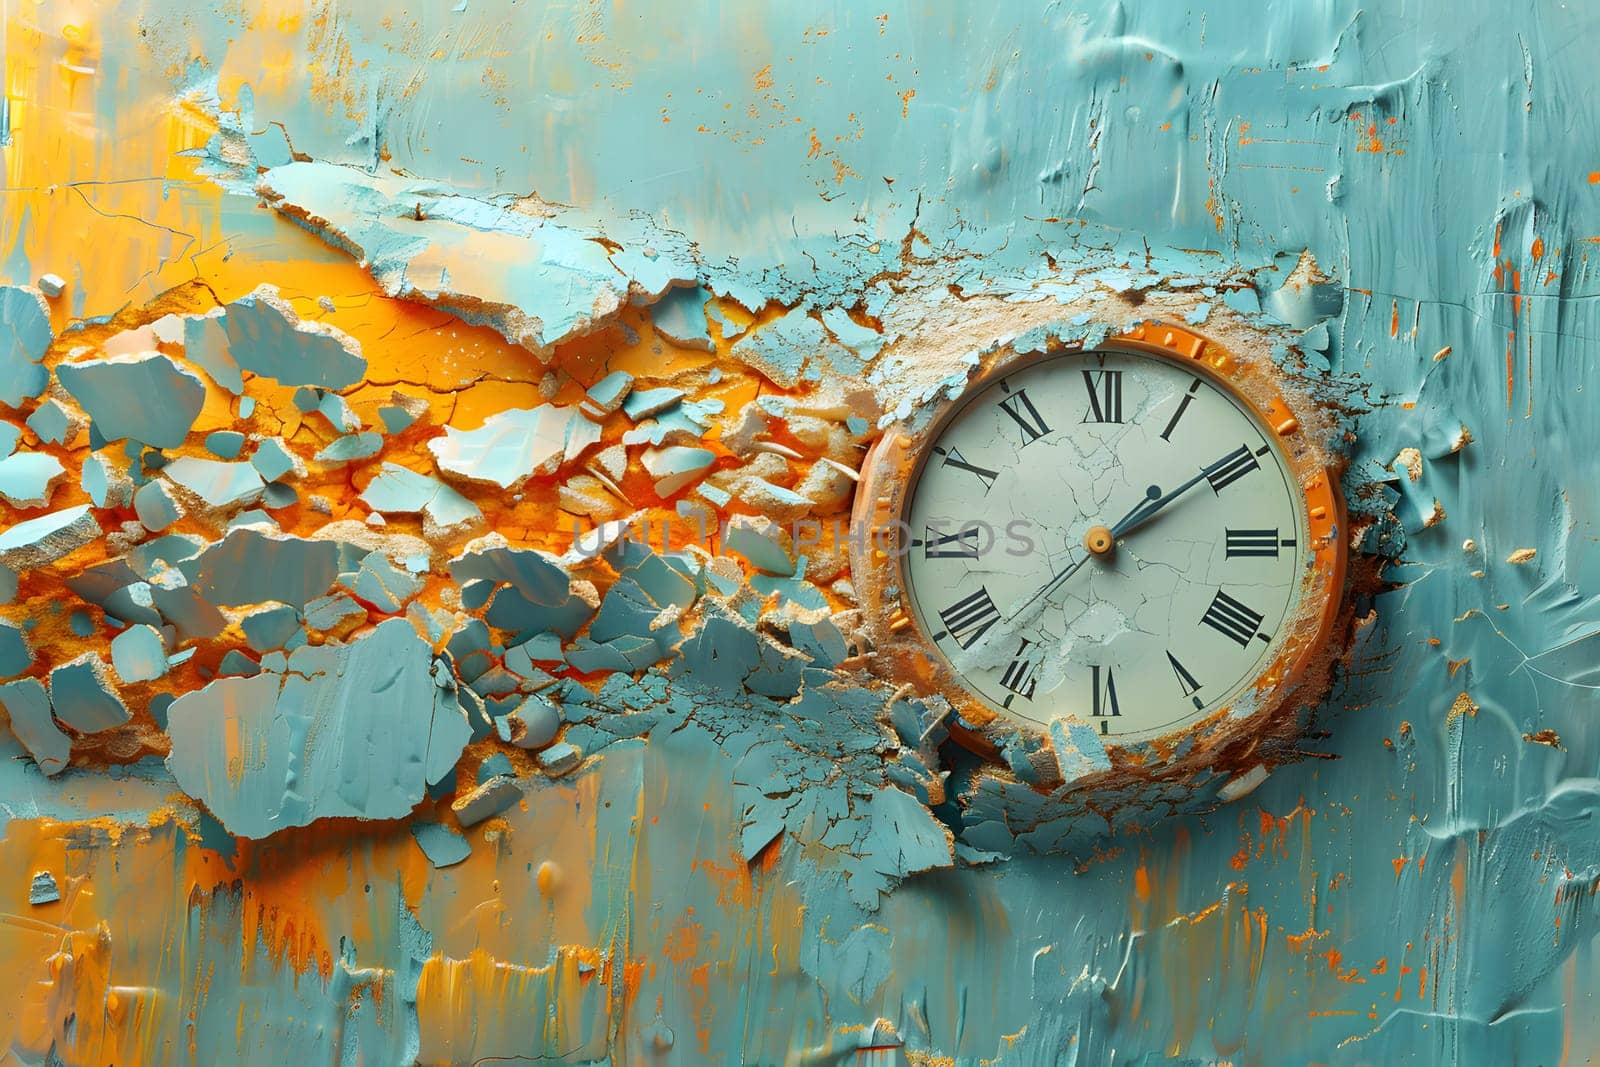 A vivid conceptual image demonstrating transience of time with a clock embedded in peeling colorful paint on abstract background